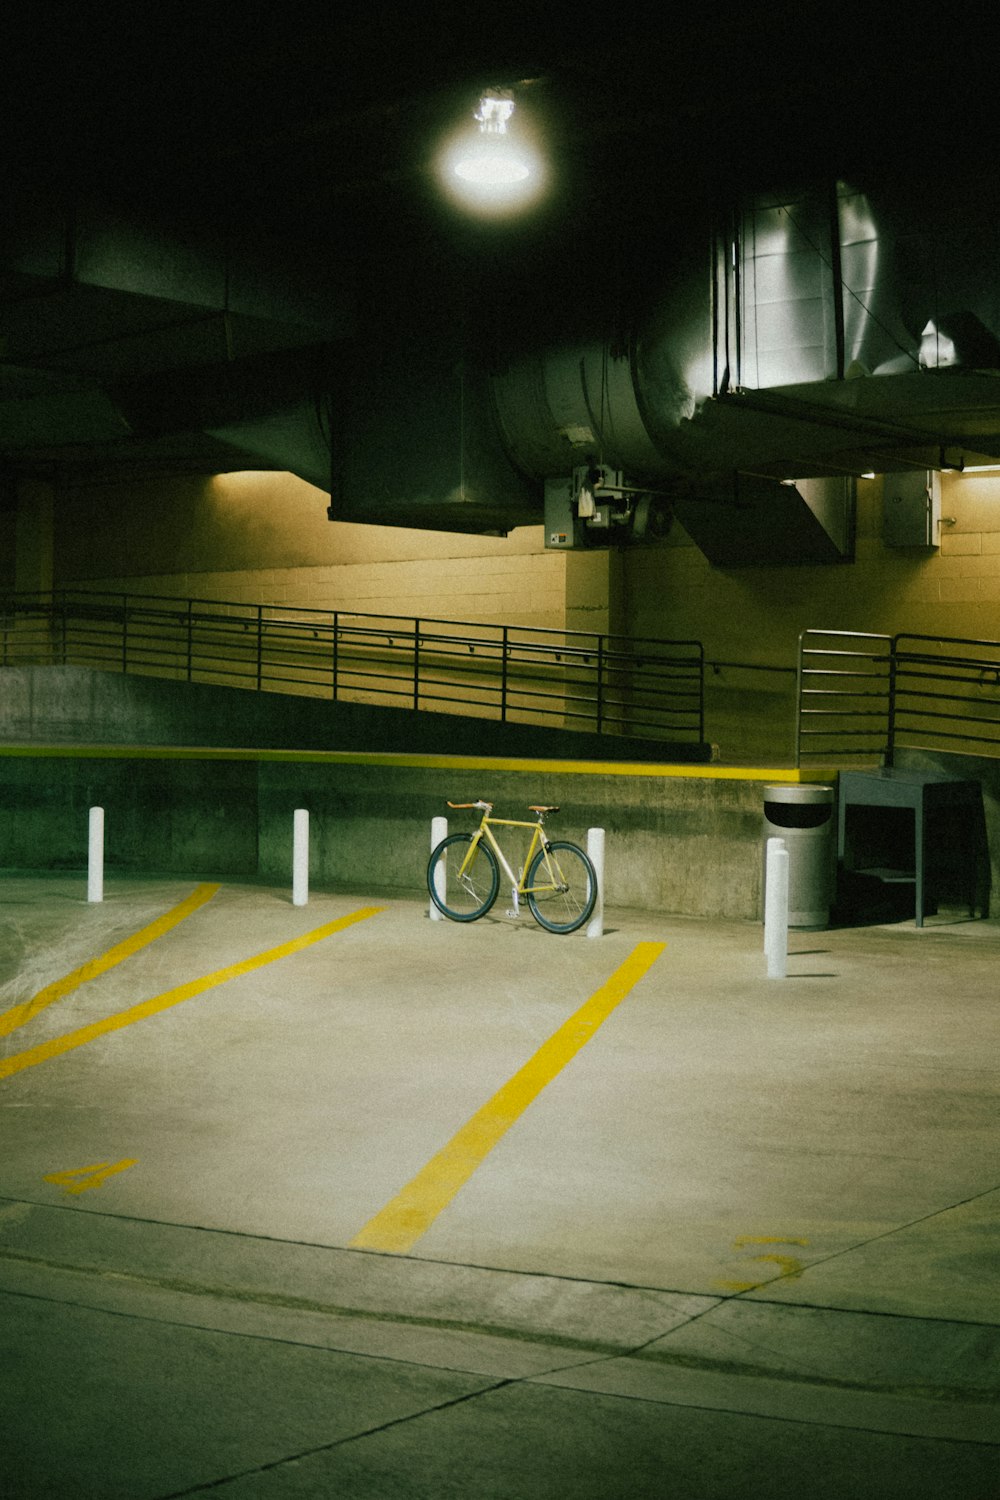 a bike is parked in a parking lot